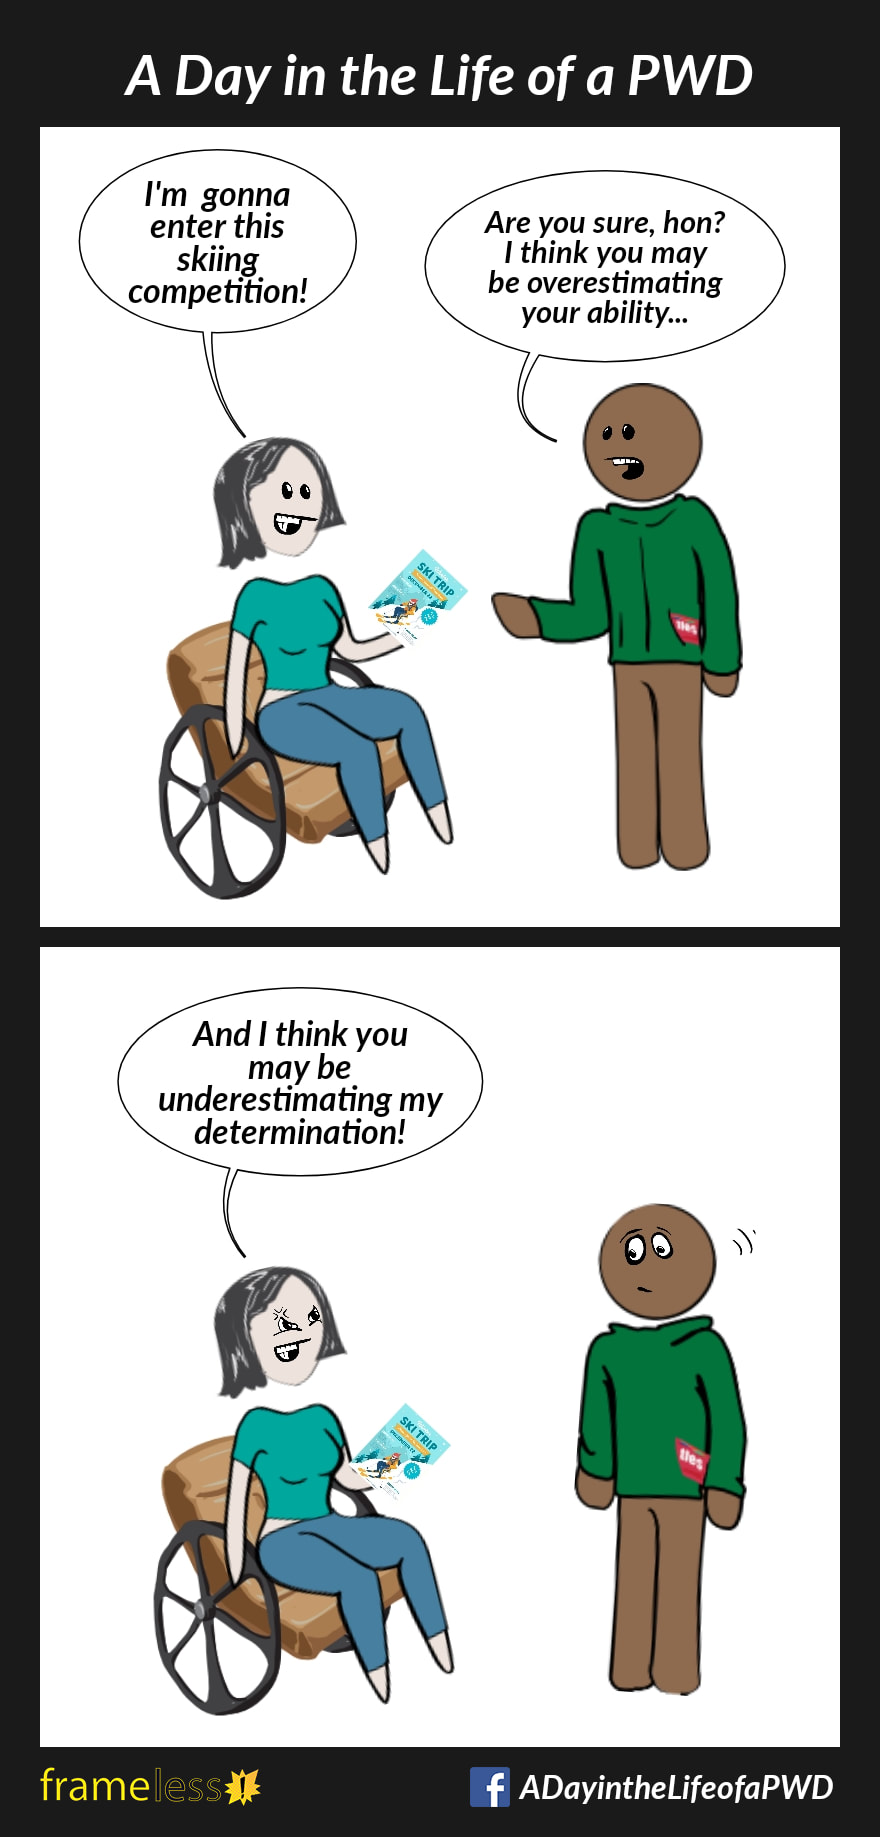 COMIC STRIP 
A Day in the Life of a PWD (Person With a Disability) 

Frame 1:
A woman in a wheelchair is holding a flyer and talking to a friend.
WOMAN: I'm gonna enter this skiing competition!
FRIEND: Are you sure, hon? I think you may be overestimating your ability...

Frame 2:
WOMAN (irritated): And I think you may be underestimating my determination!